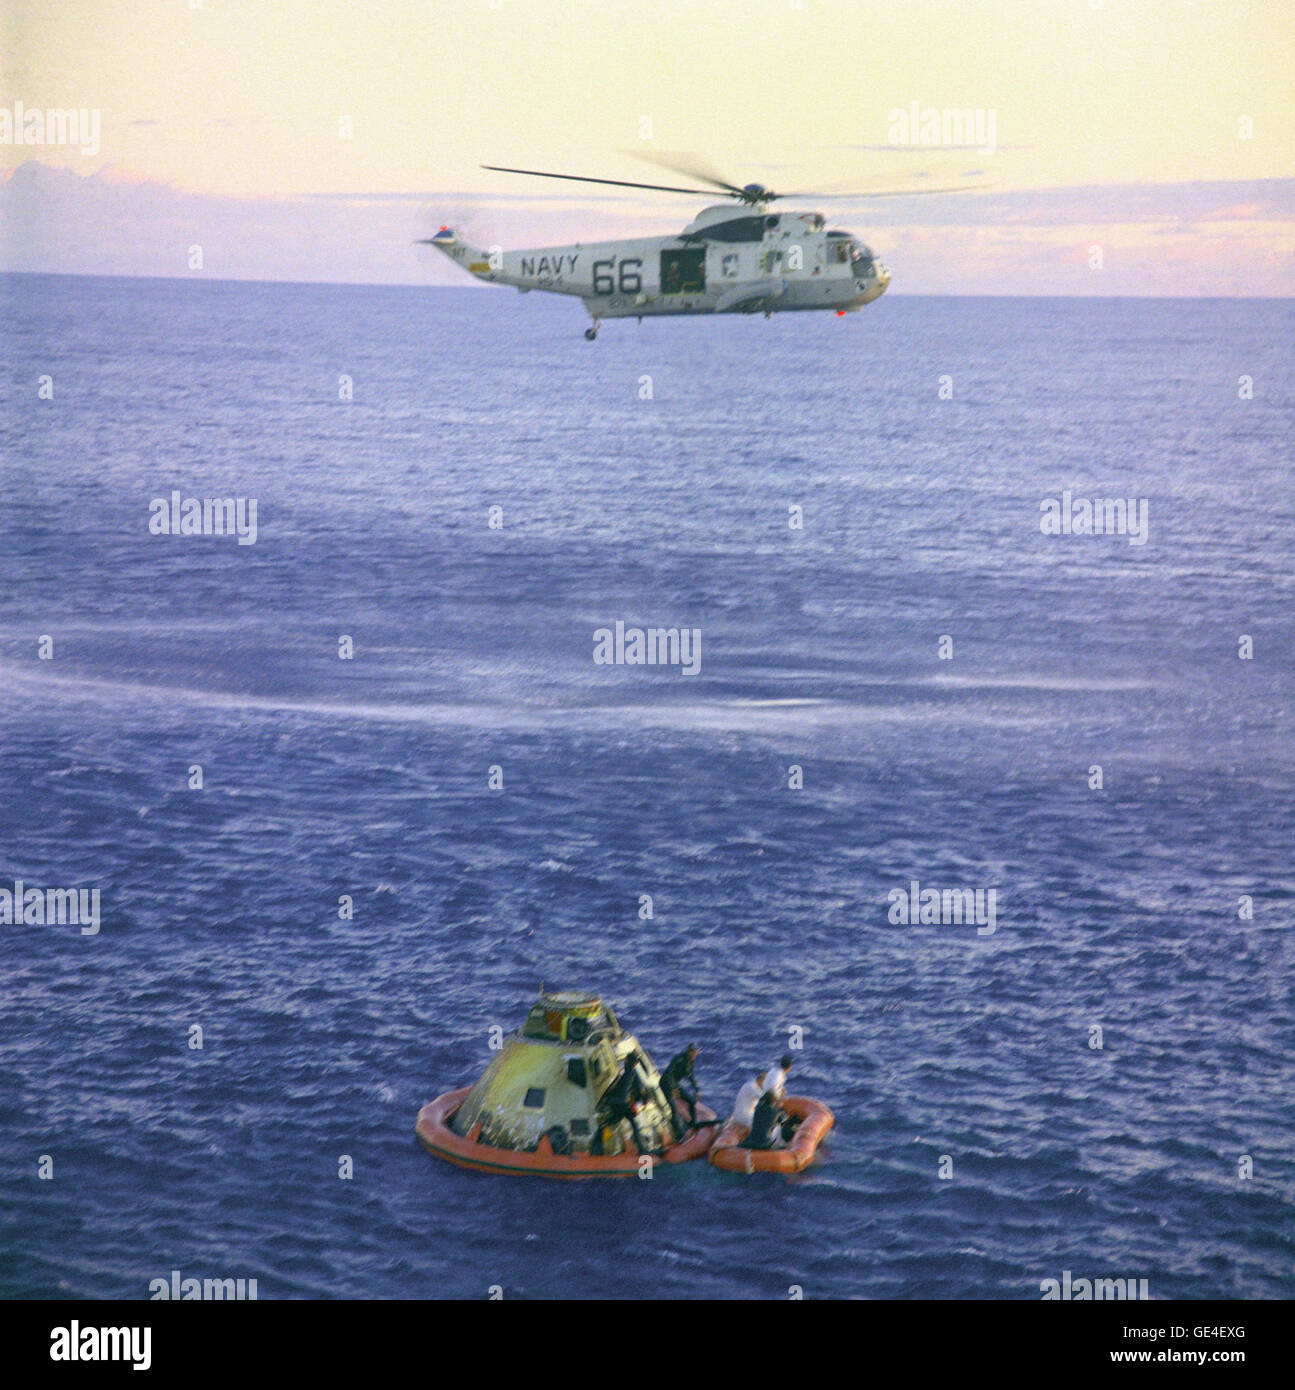 A Navy helicopter arrives to recover the Apollo 10 astronauts, seen entering a life raft, as the Command Module &quot;Charlie Brown&quot; floats in the South Pacific. U.S. Navy underwater demolition team swimmers assist in the recovery operations. Splashdown occurred at 12:53 p.m. eastern time, May 26, 1969, about 400 miles east of American Samoa. Note that in this photo the divers have attached a flotation collar to the spacecraft.  Image # : S69-21036 Date: May 26, 1969 Stock Photo